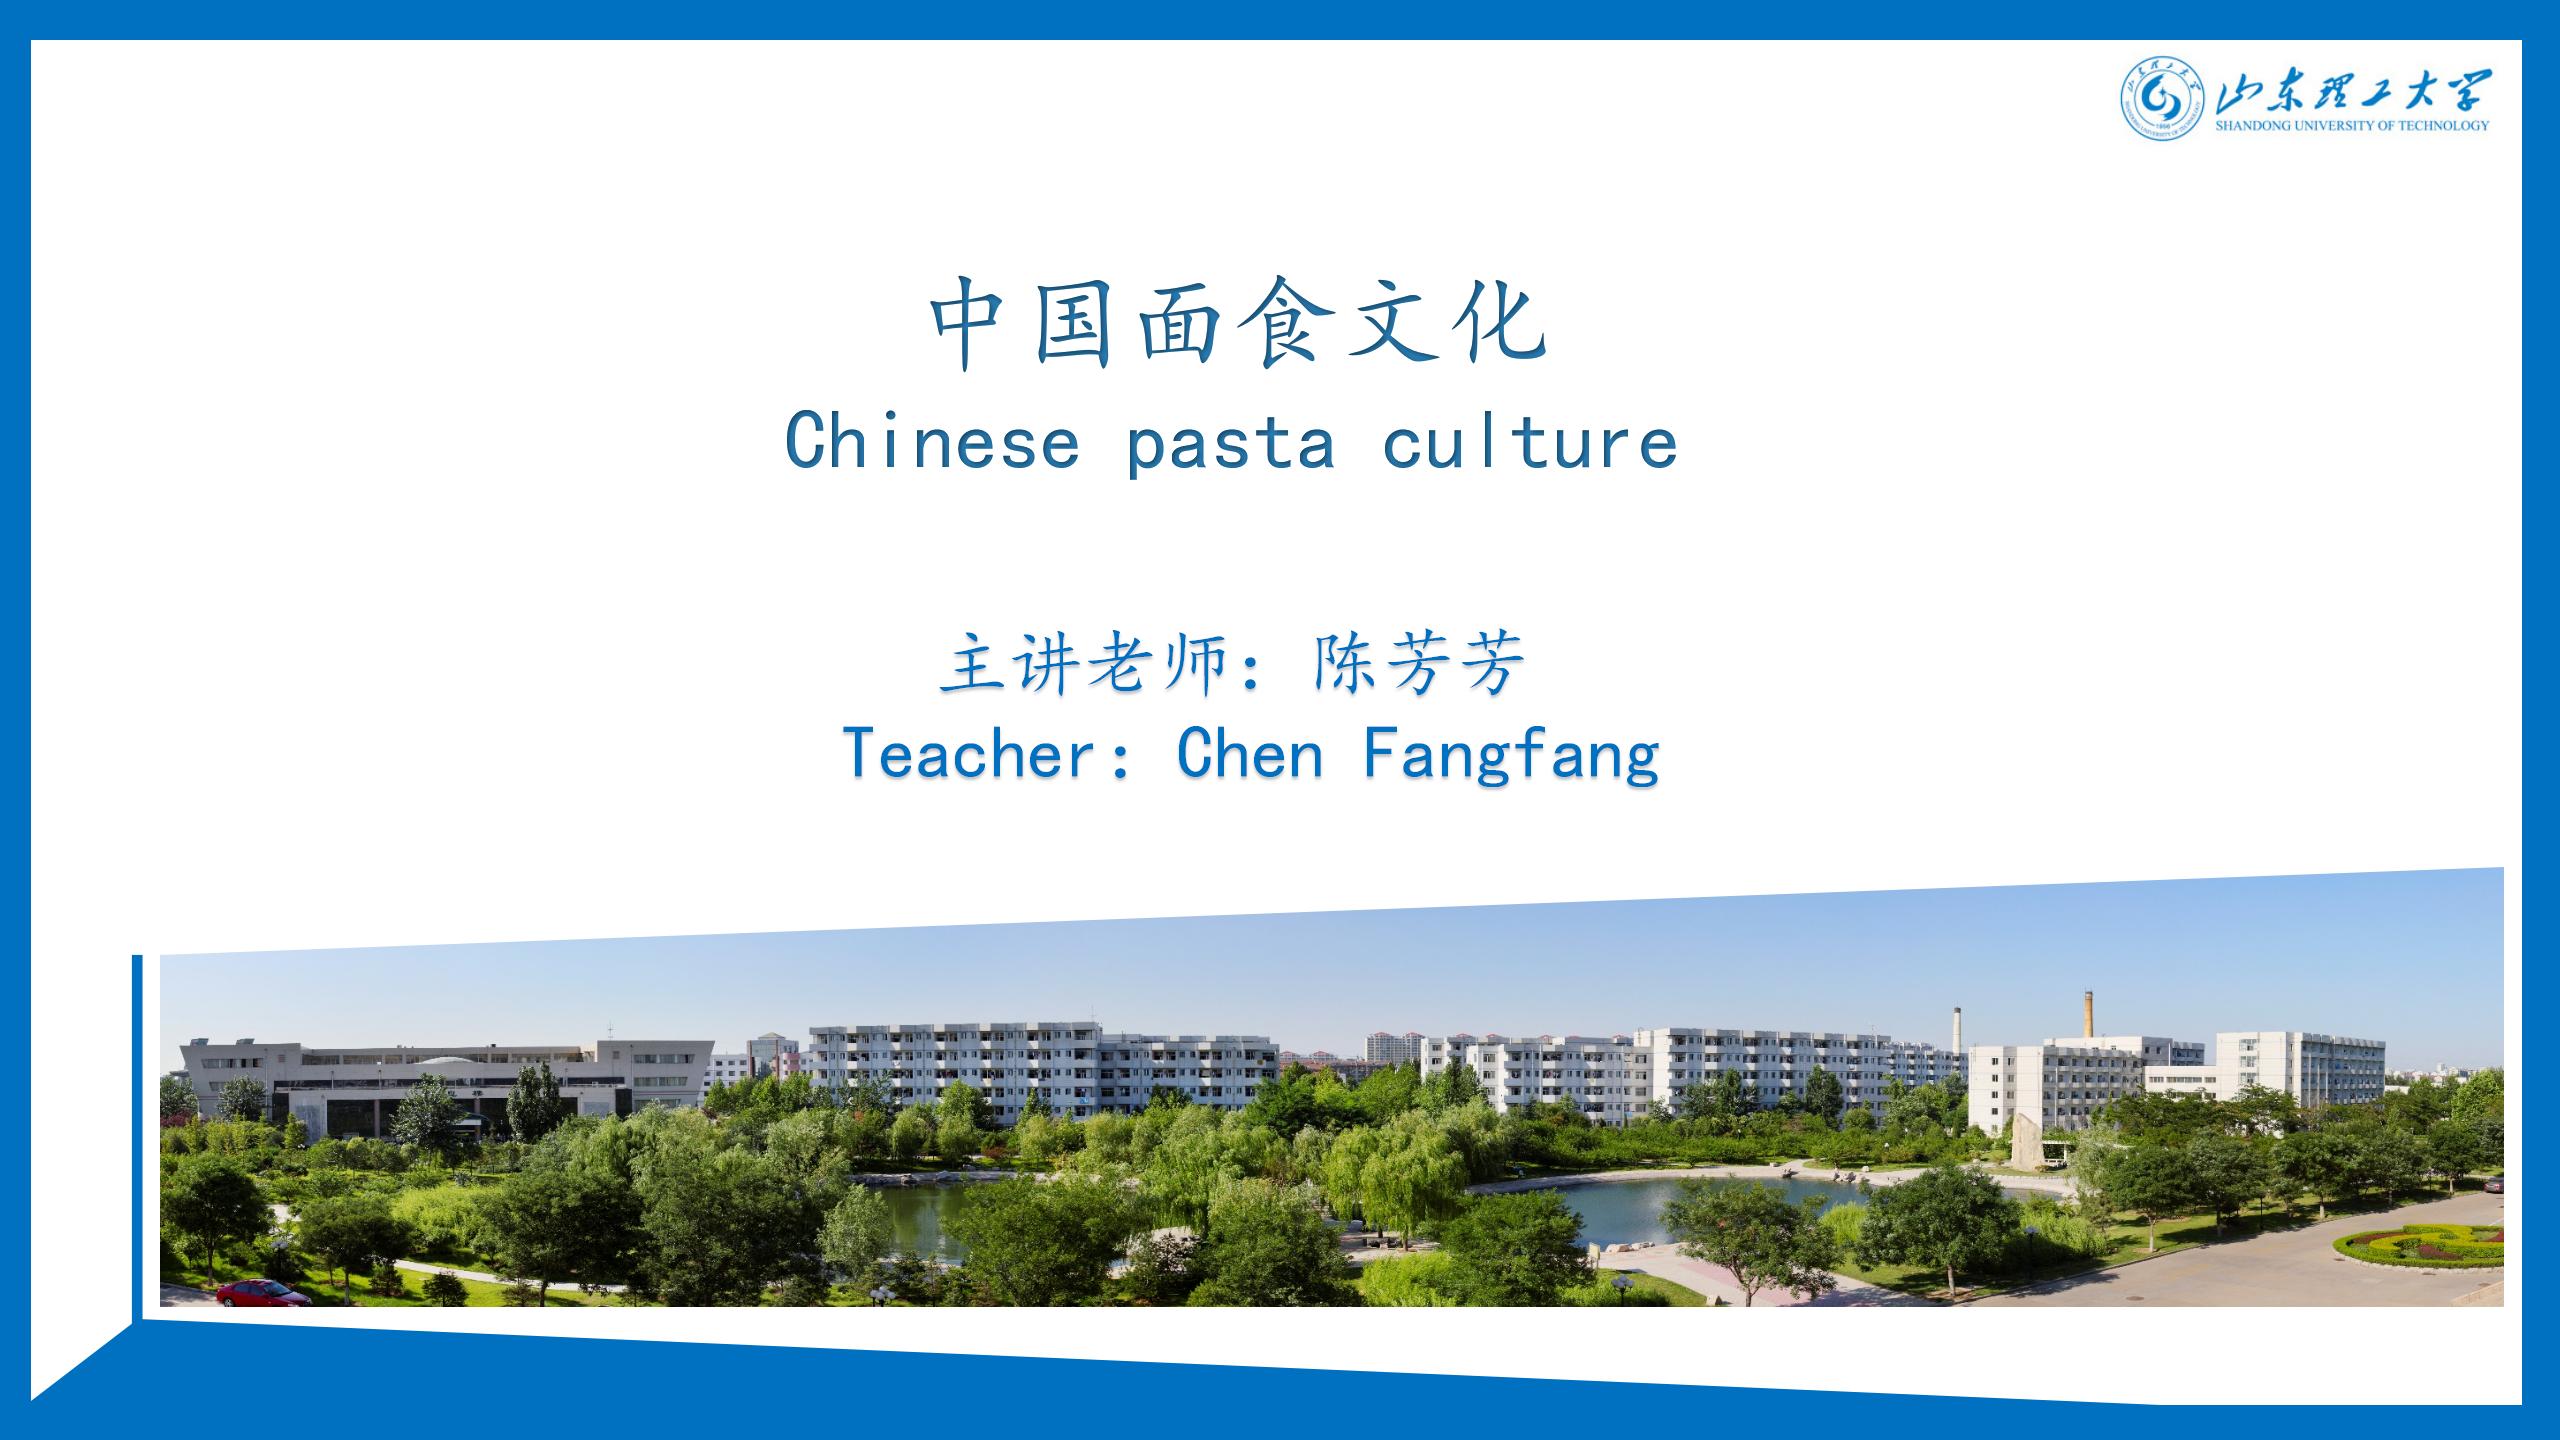 Chinese pasta culture